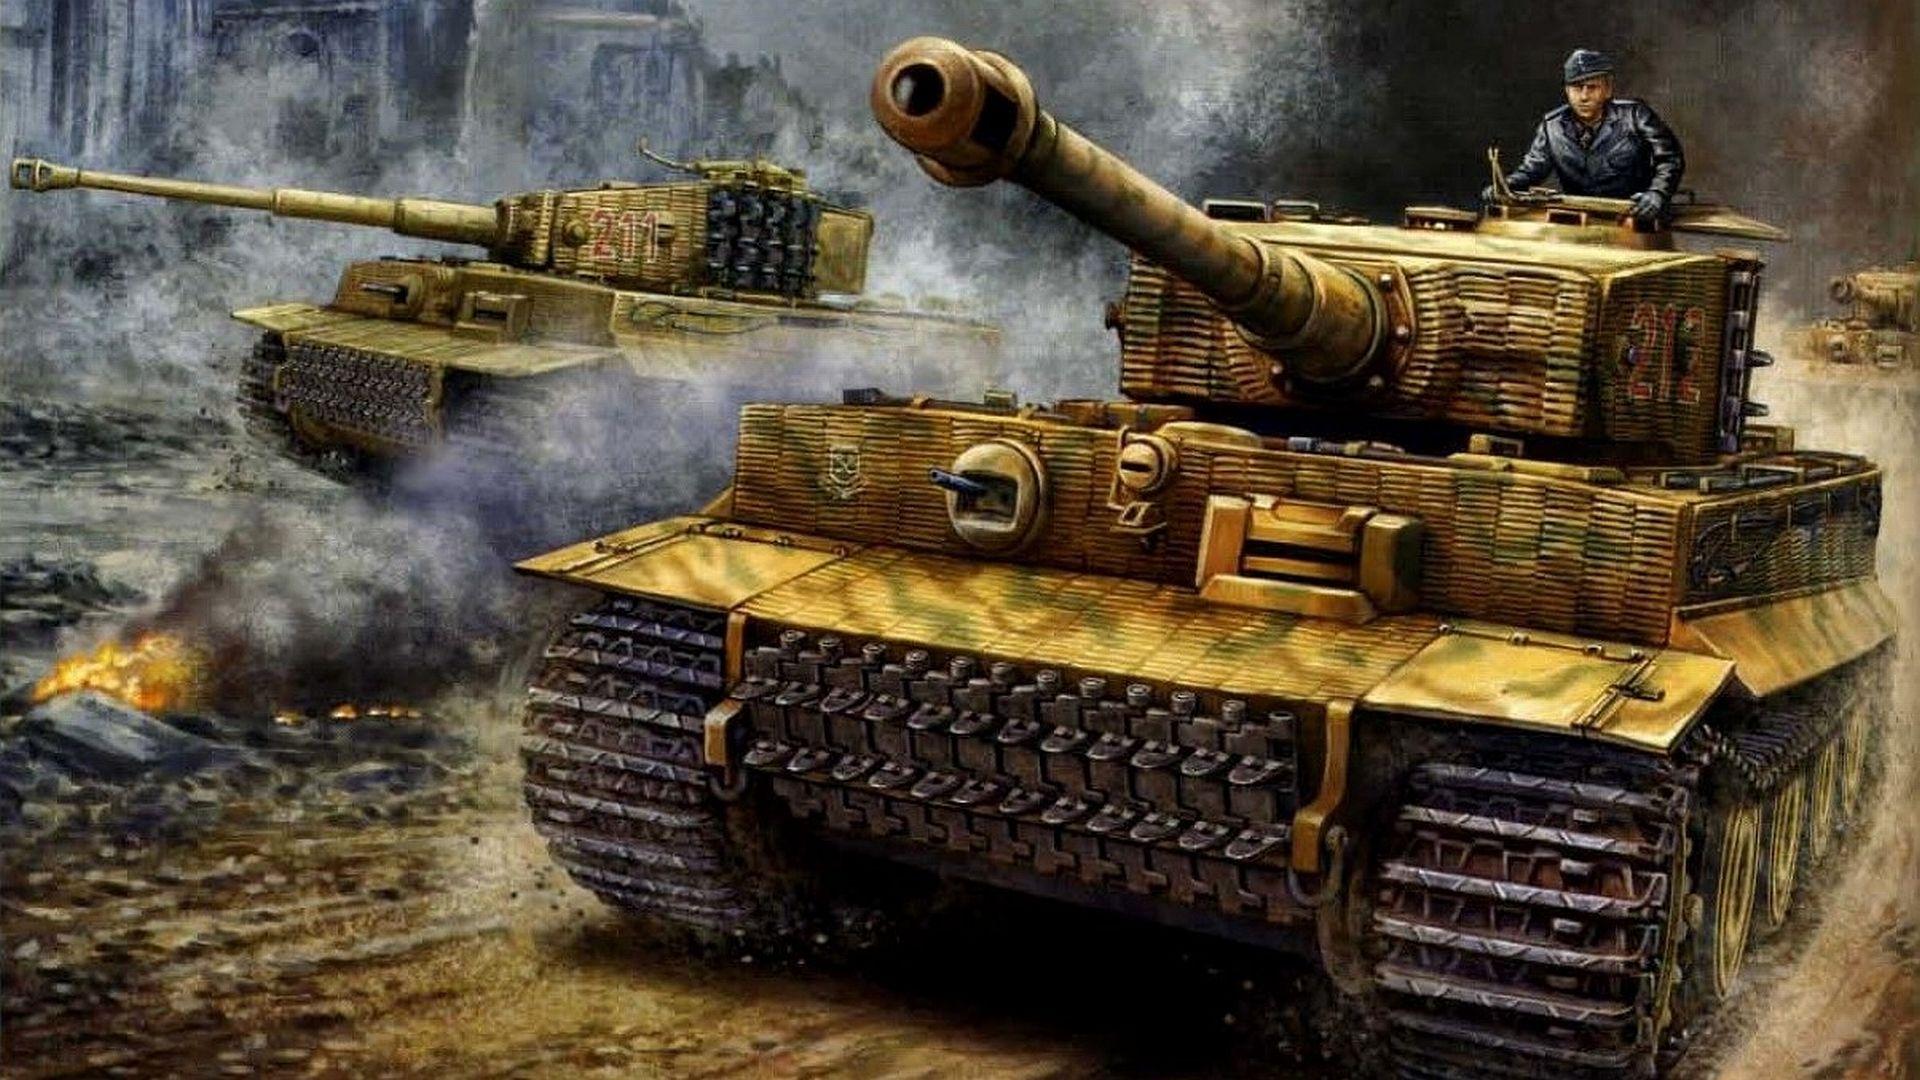 Tiger Tank Wallpapers for iPhone